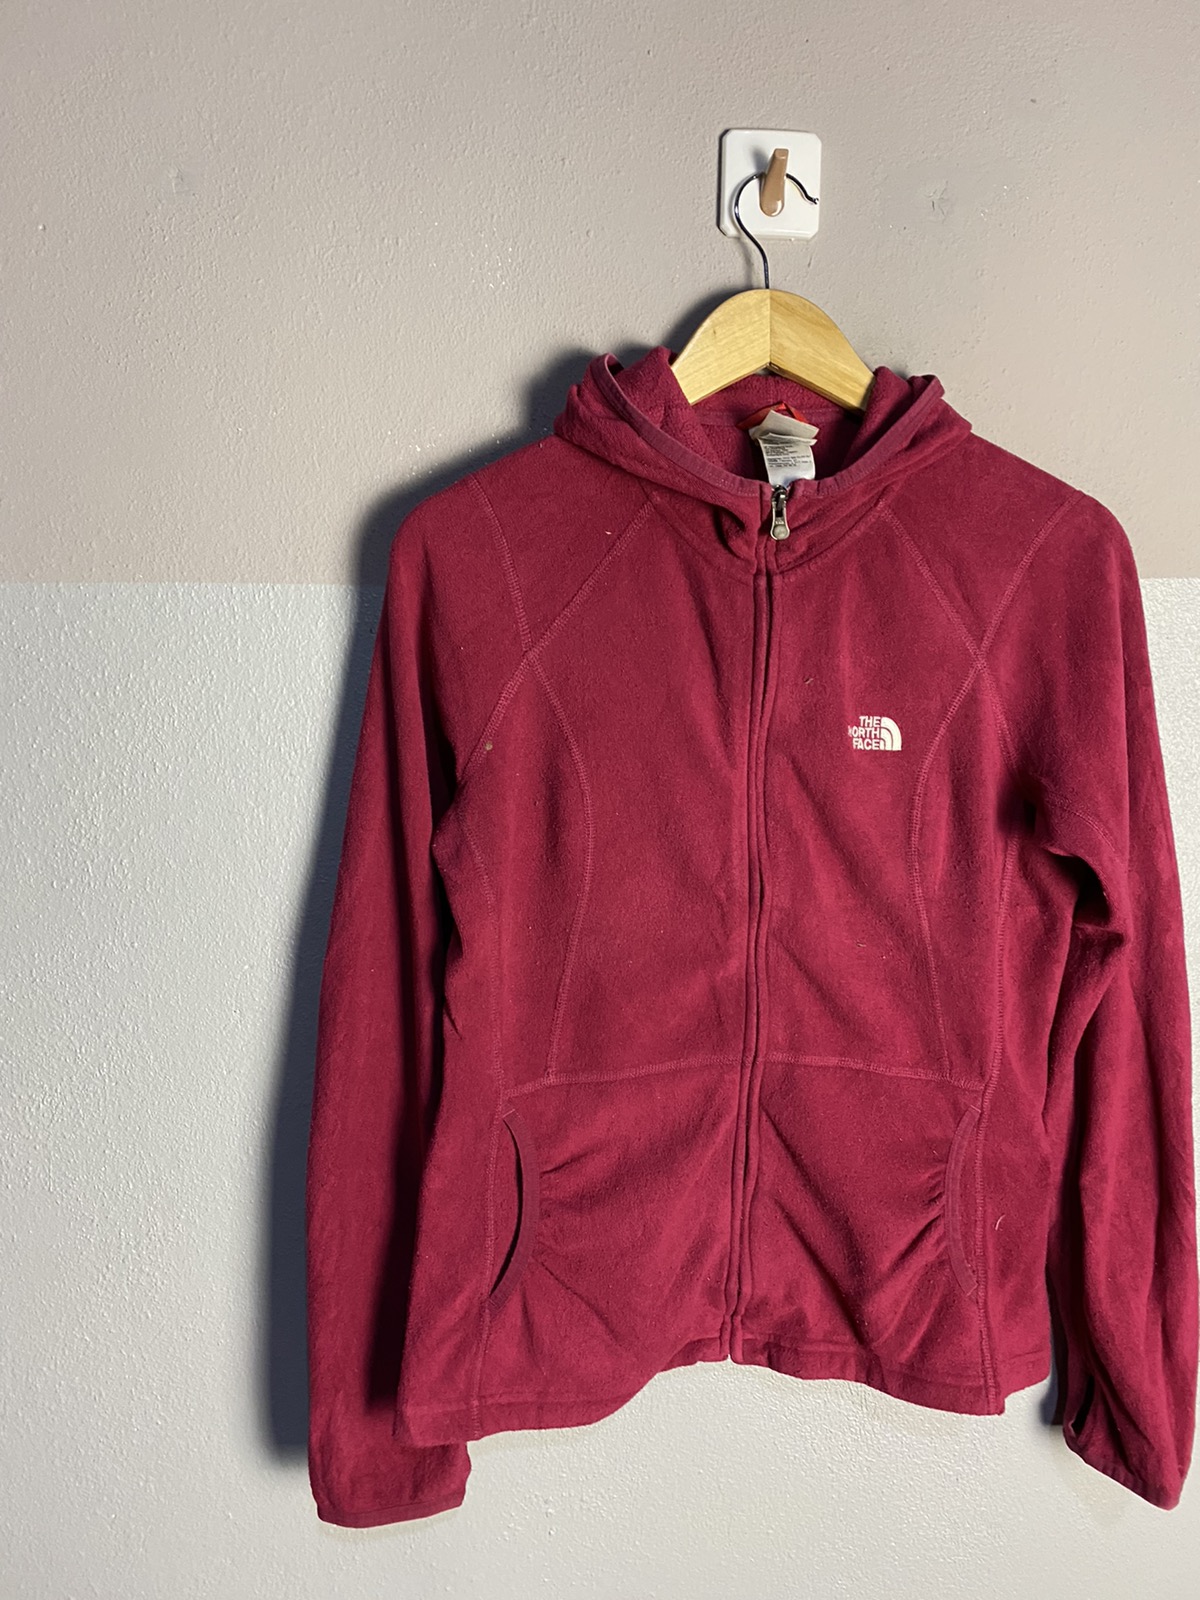 🔥SALE🔥THE NORTH FACE HOODIE - 4